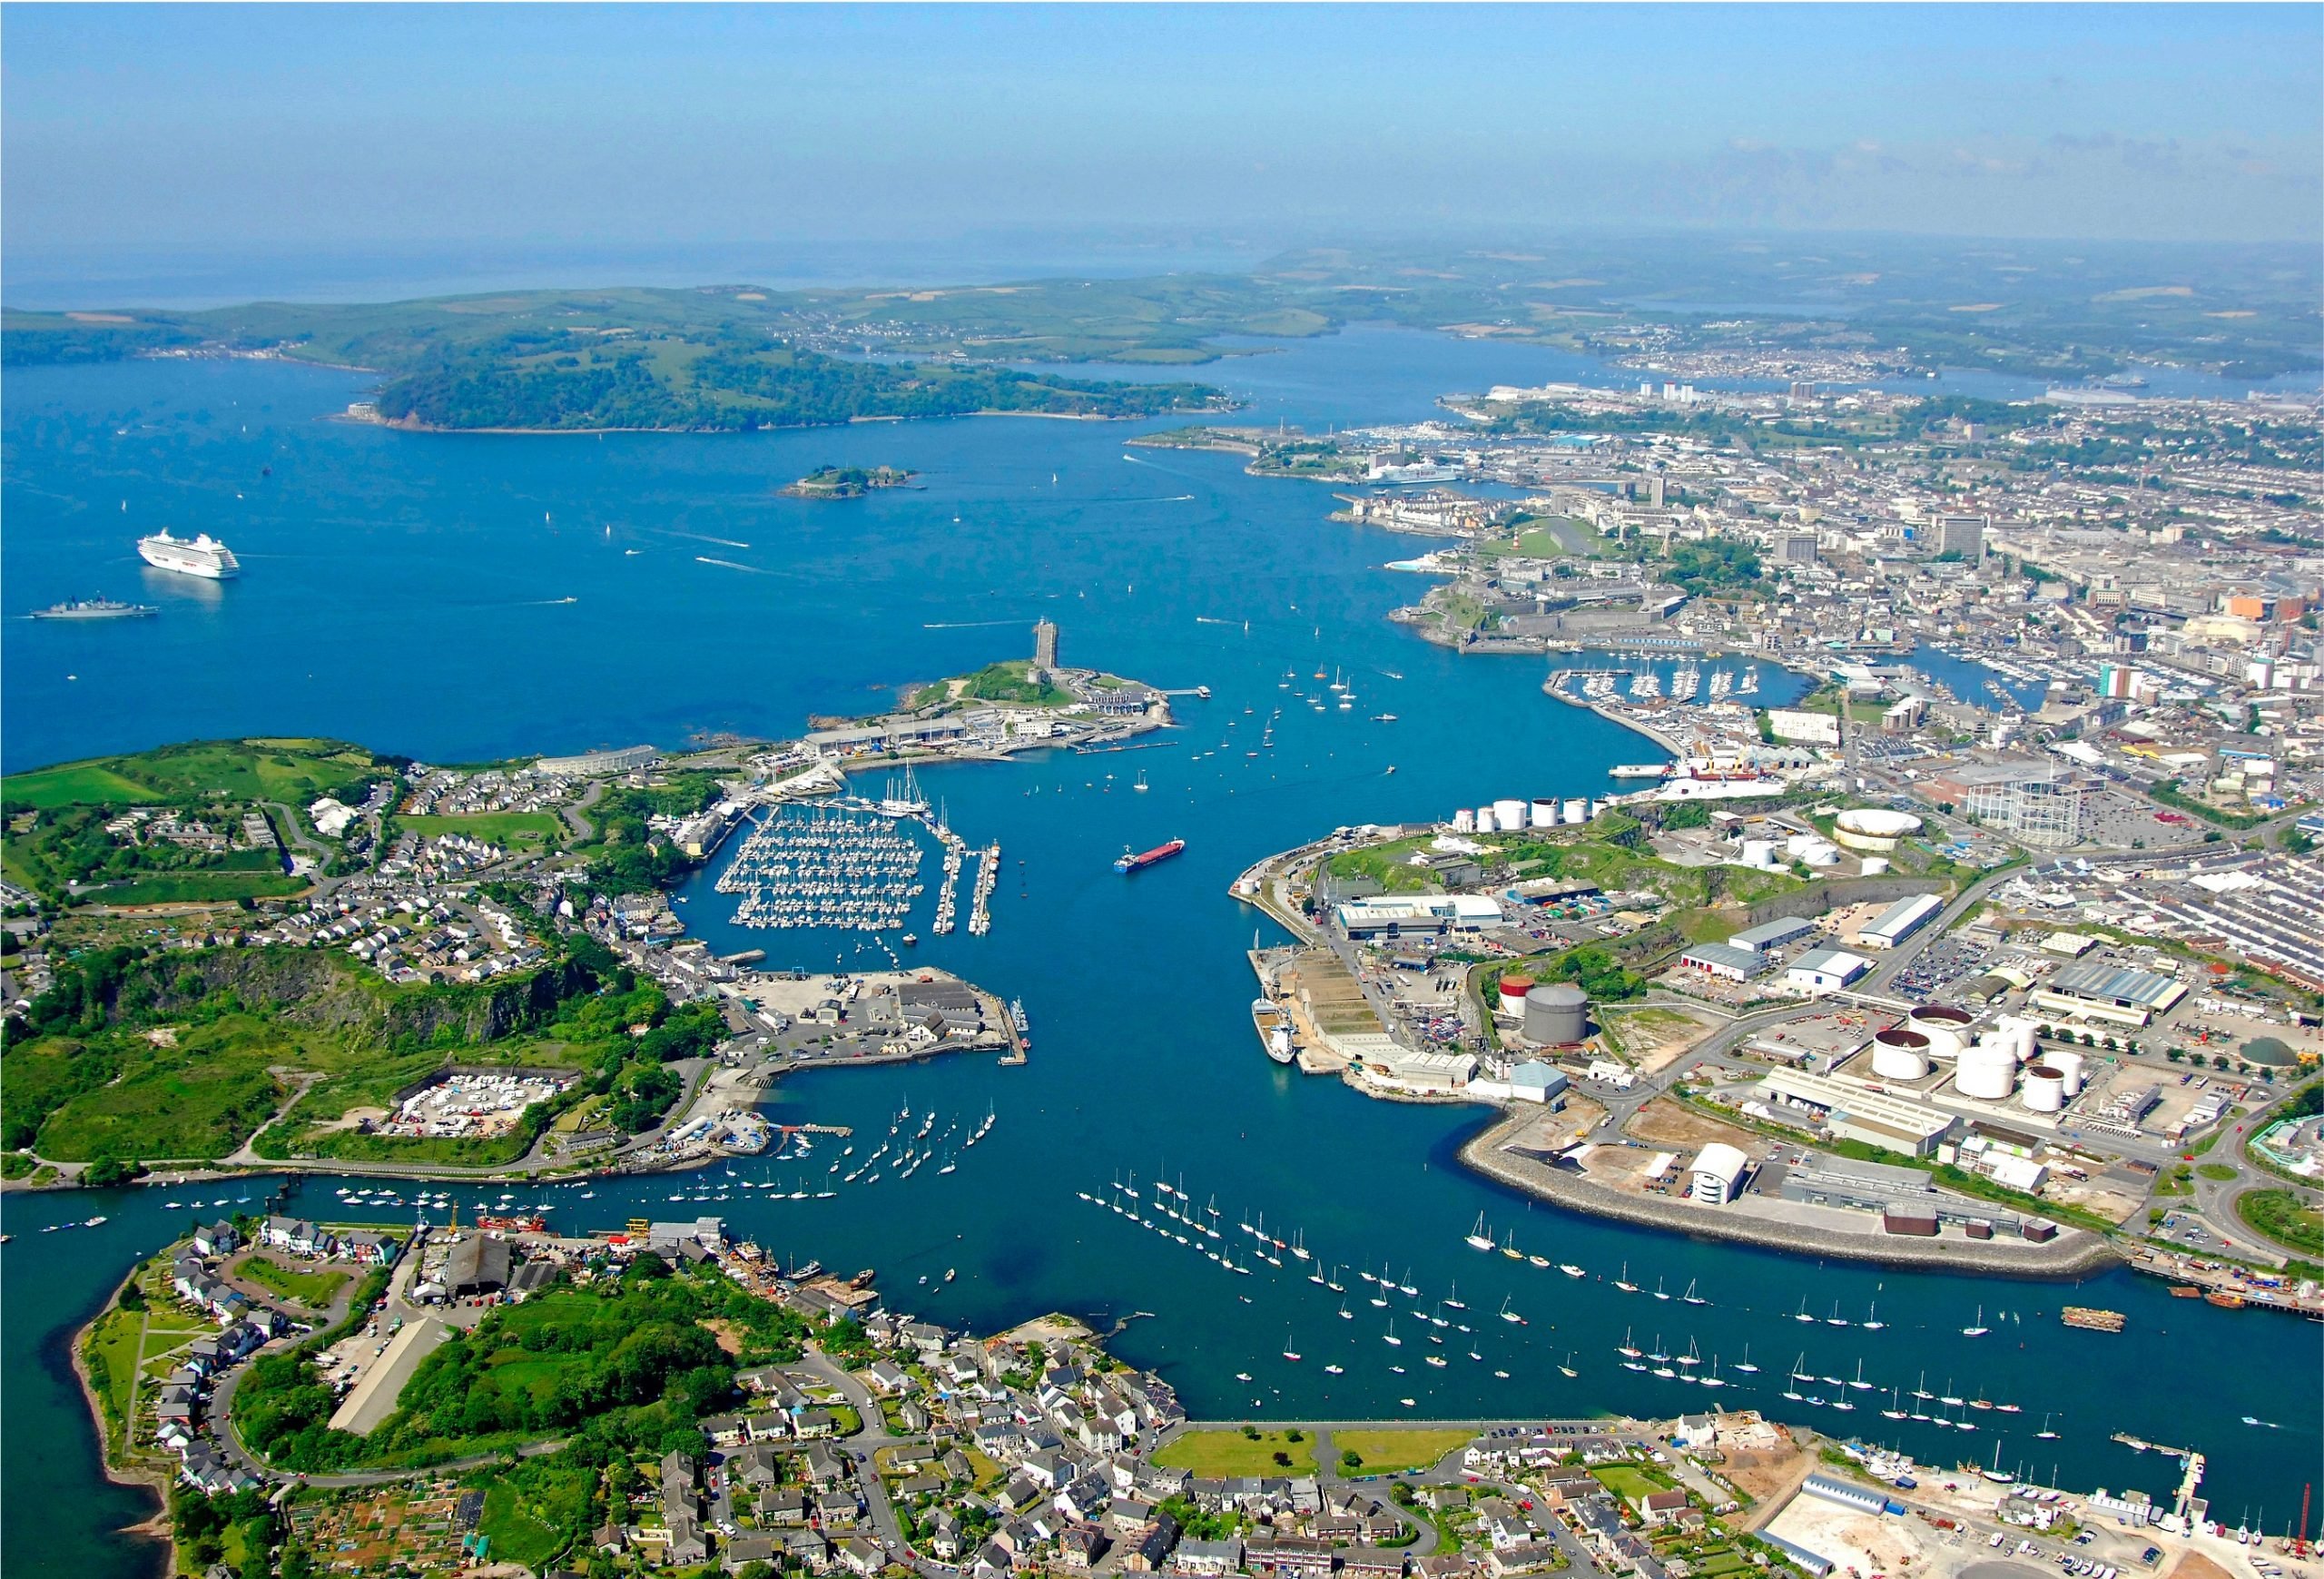 Plymouth in the UK